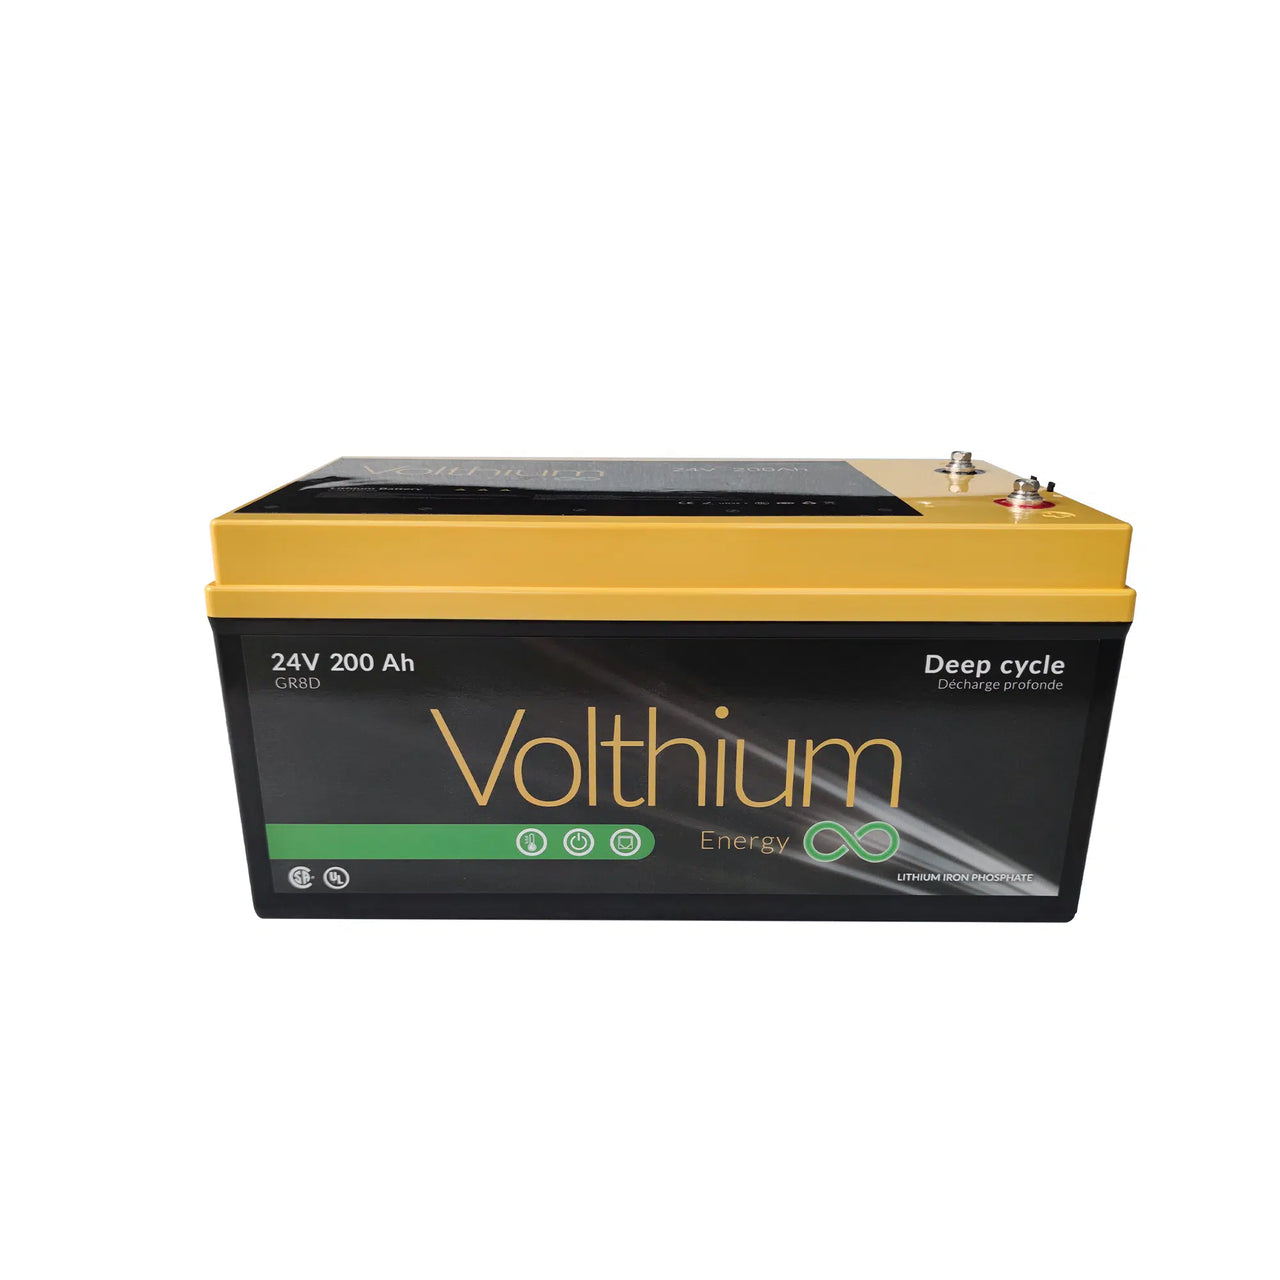 Volthium - Batterie 24V 200AH ABS 5.12KWH - 25.6-200-G8DY-CO